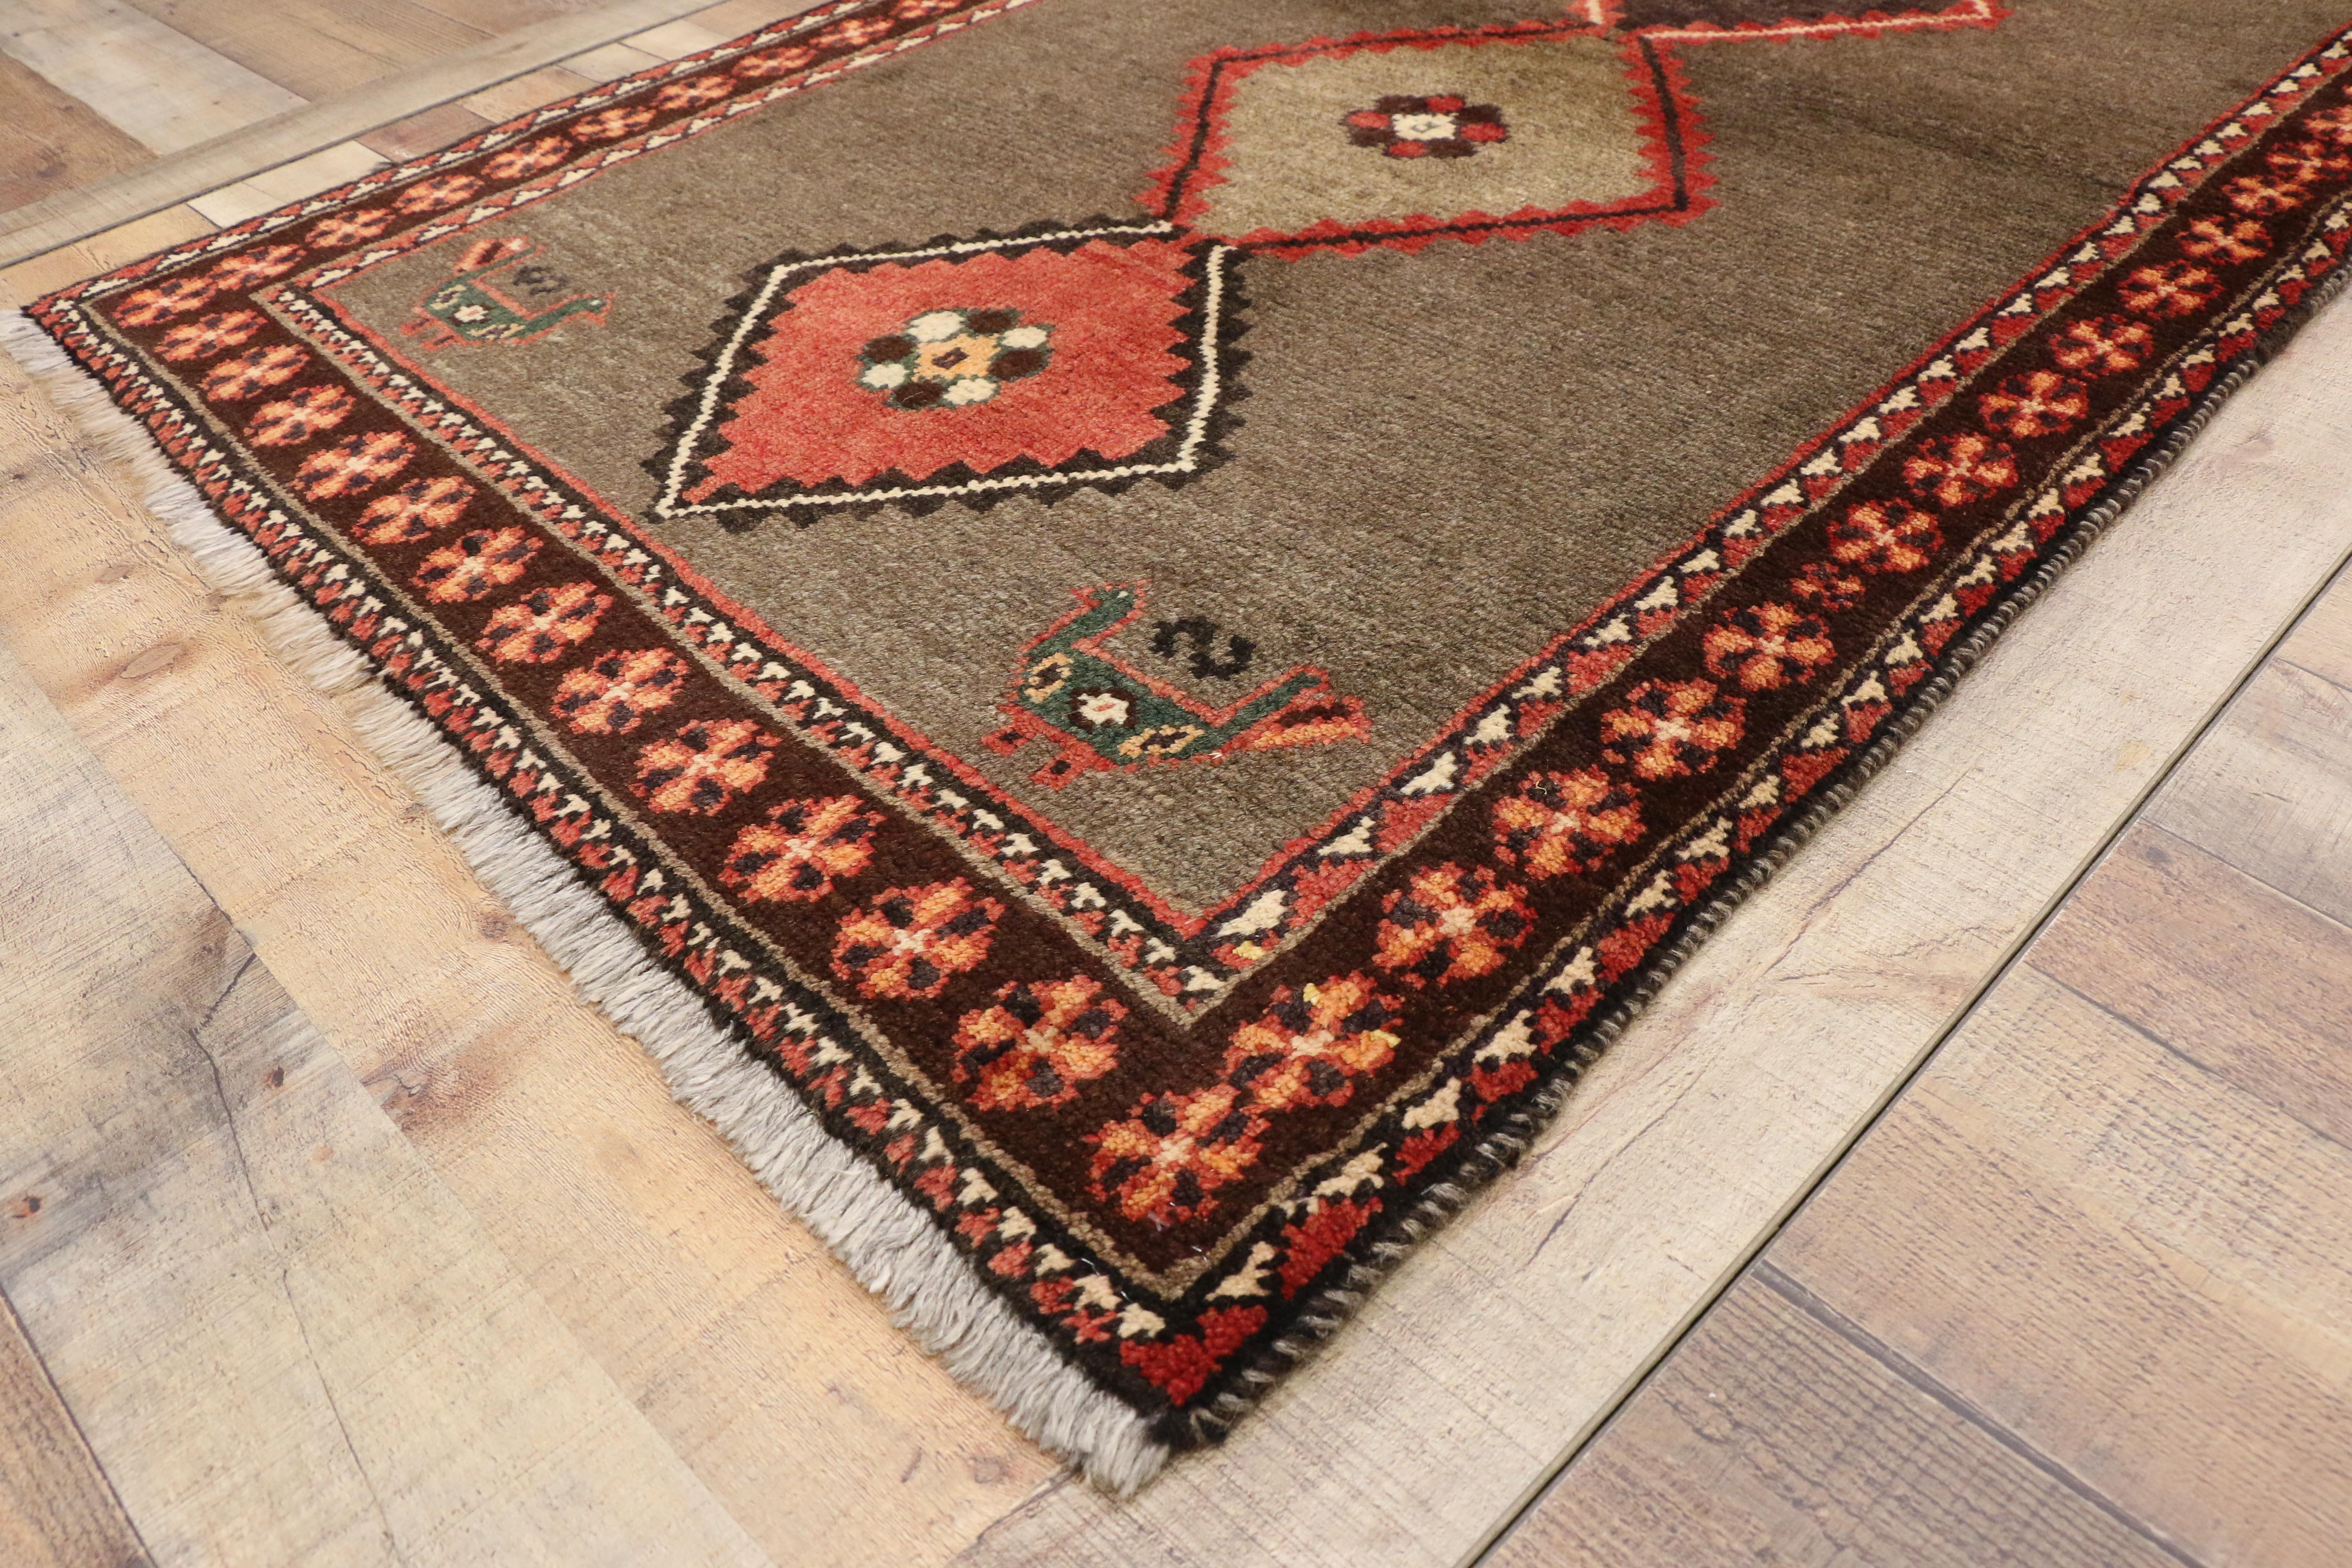 75053 Vintage Persian Shiraz Rug with Modern Tribal Style 03'04 x 06'02. Hand-knotted wool vintage Persian Shiraz rug with modern tribal style features four repeating, stacked geometric diamond medallions in an open taupe field surrounded by